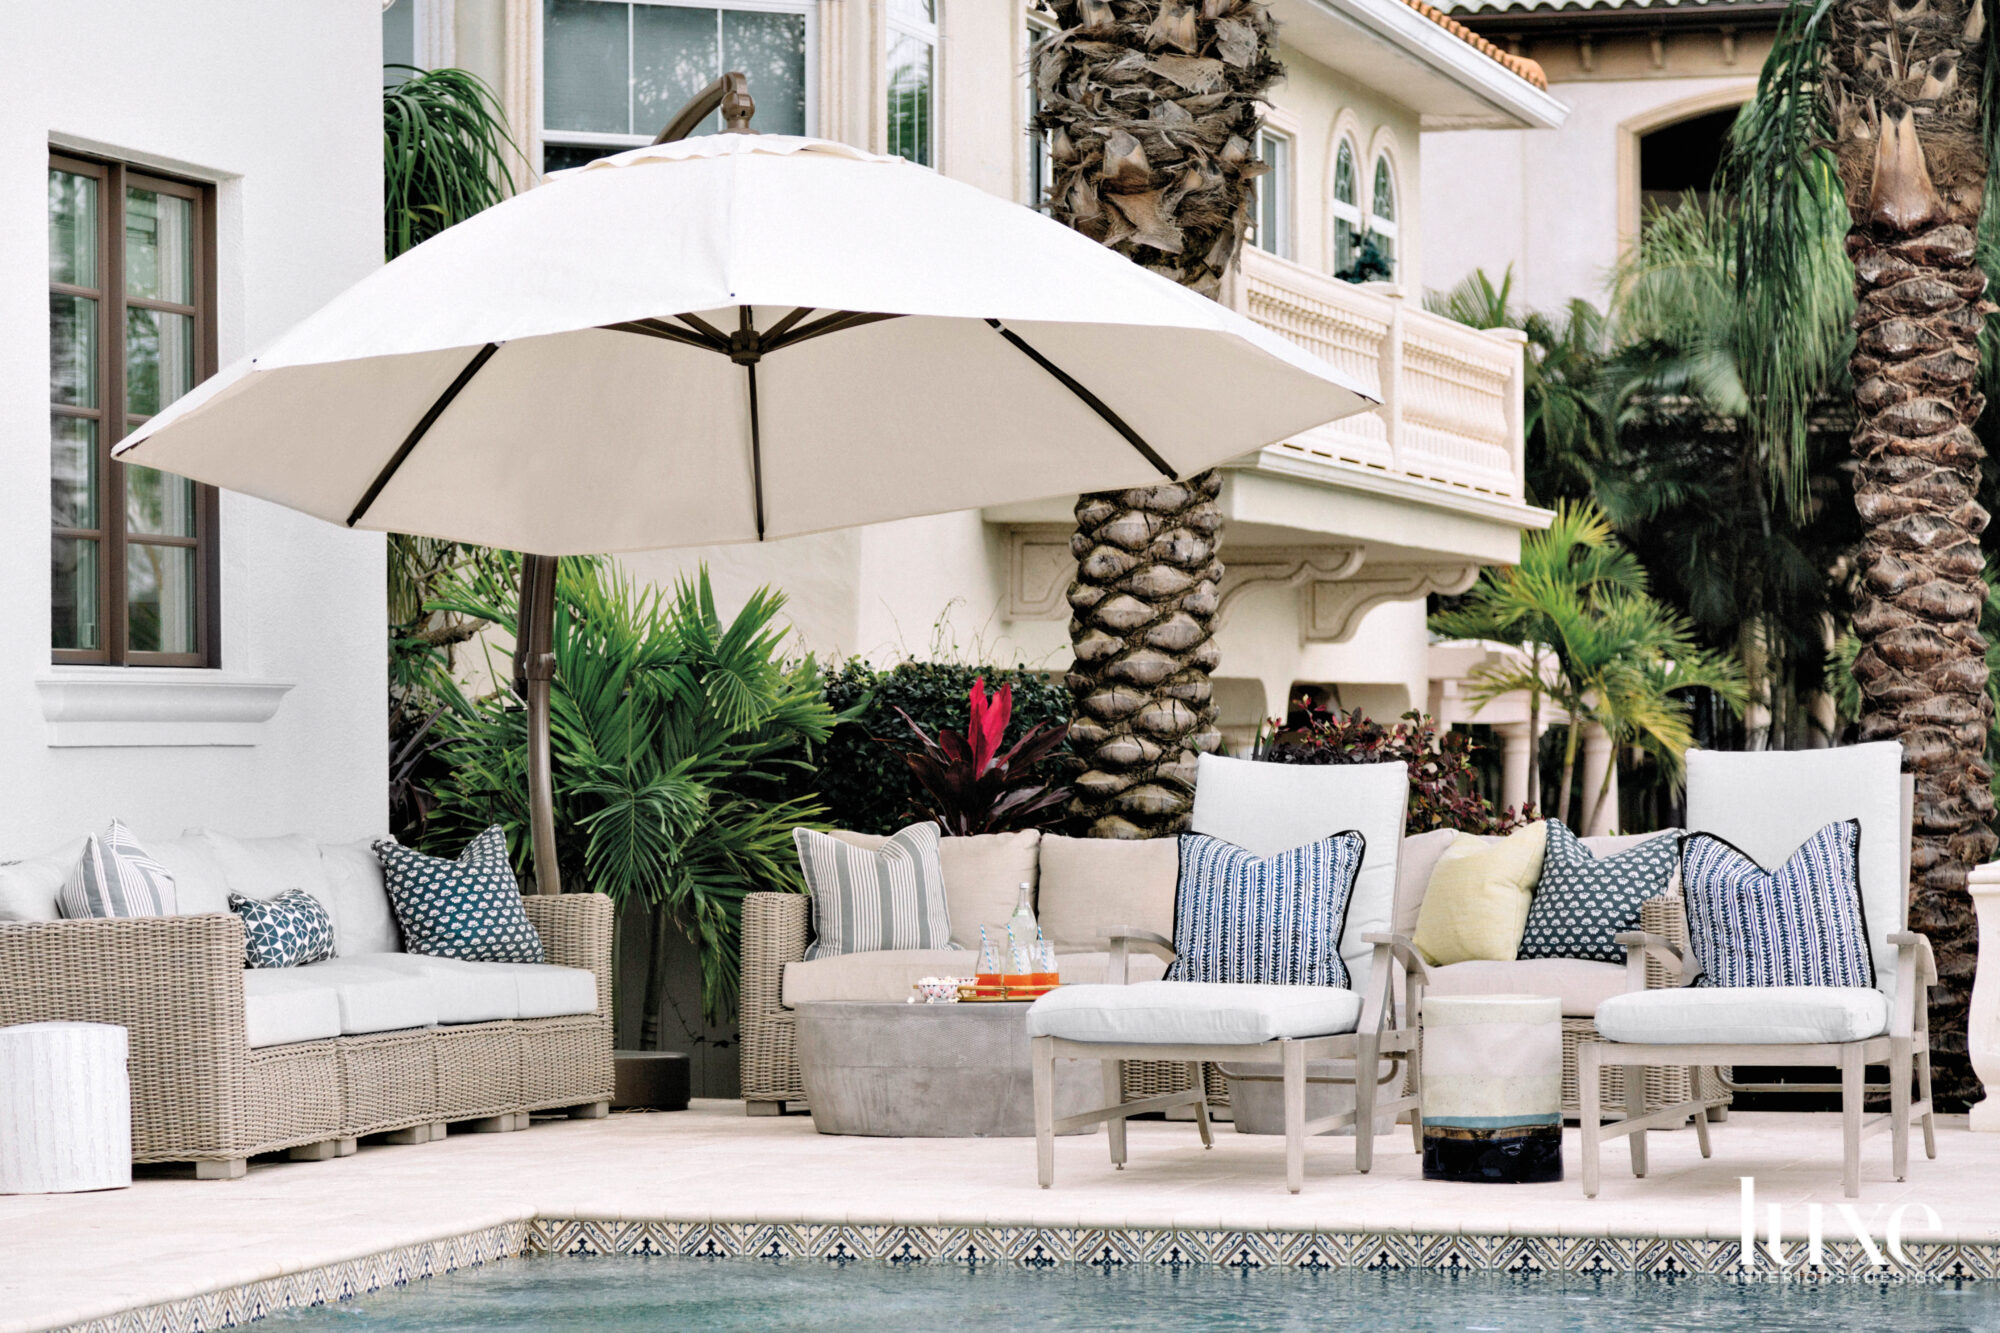 Chaises and sofas shaded by a large umbrella and next to a pool.